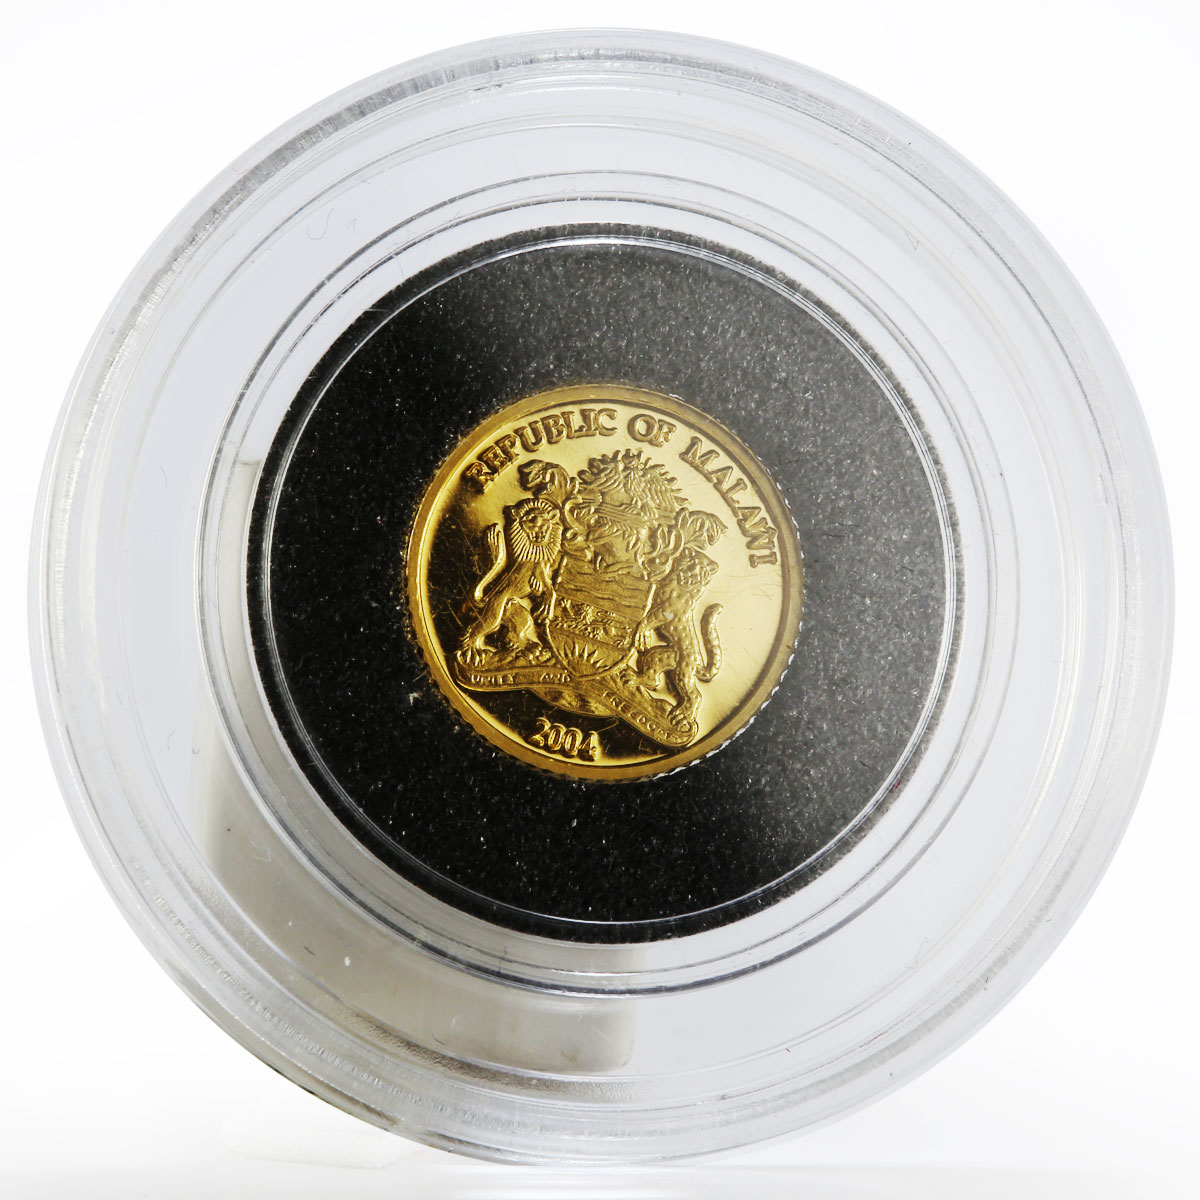 Malawi 5 kwacha Endangered Wildlife series The Leopard gold proof coin 2004